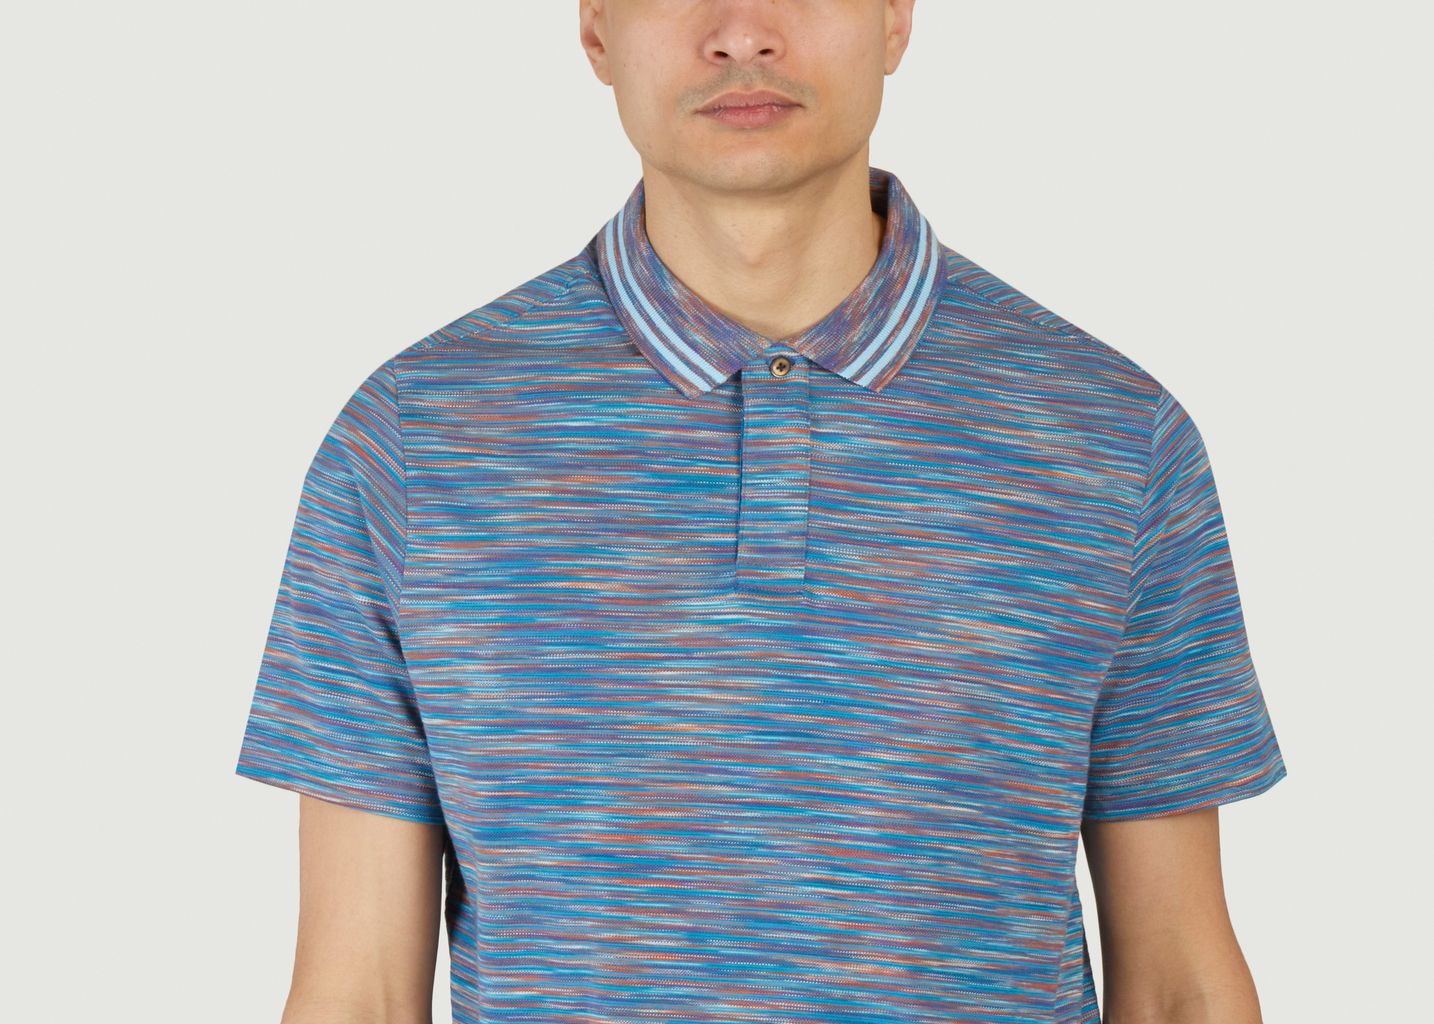 Space Dye Polo Shirt - PS by PAUL SMITH